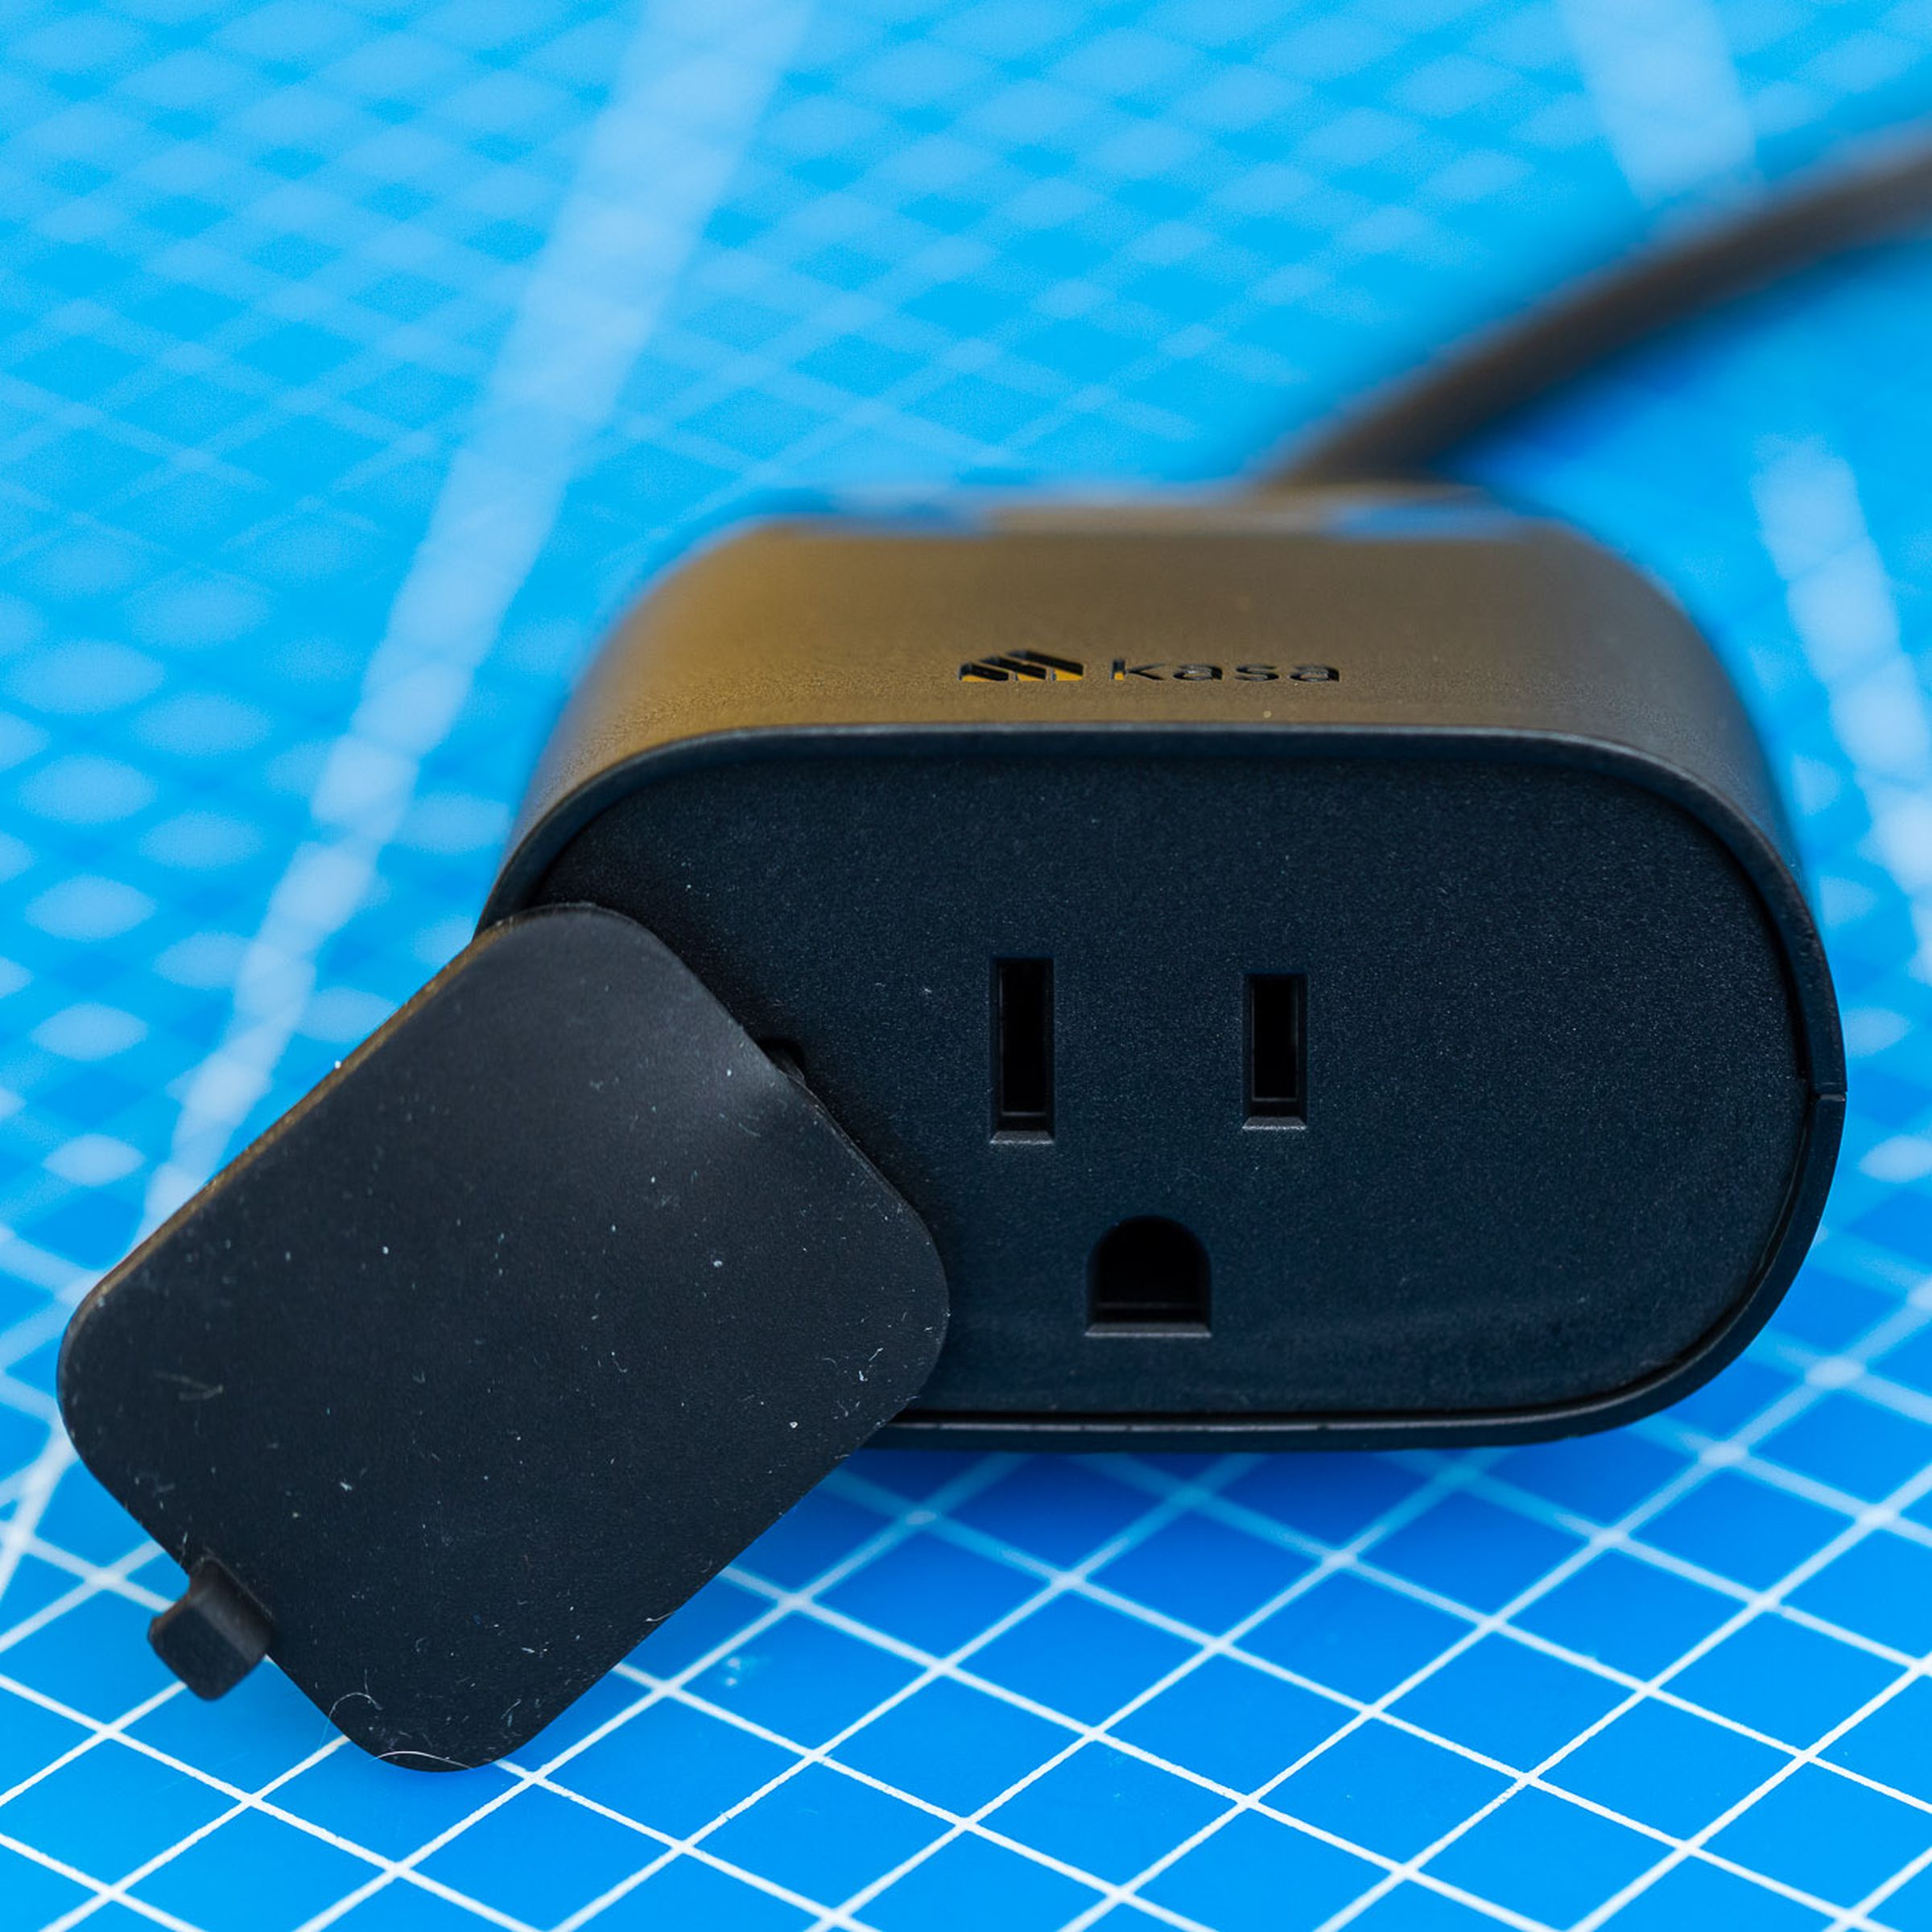 A black, two-outlet outdoor smart plug. It has a short cable leading to its own power plug, and a flap to protect the outlets from moisture. It is on a blue background with a grid of white lines.